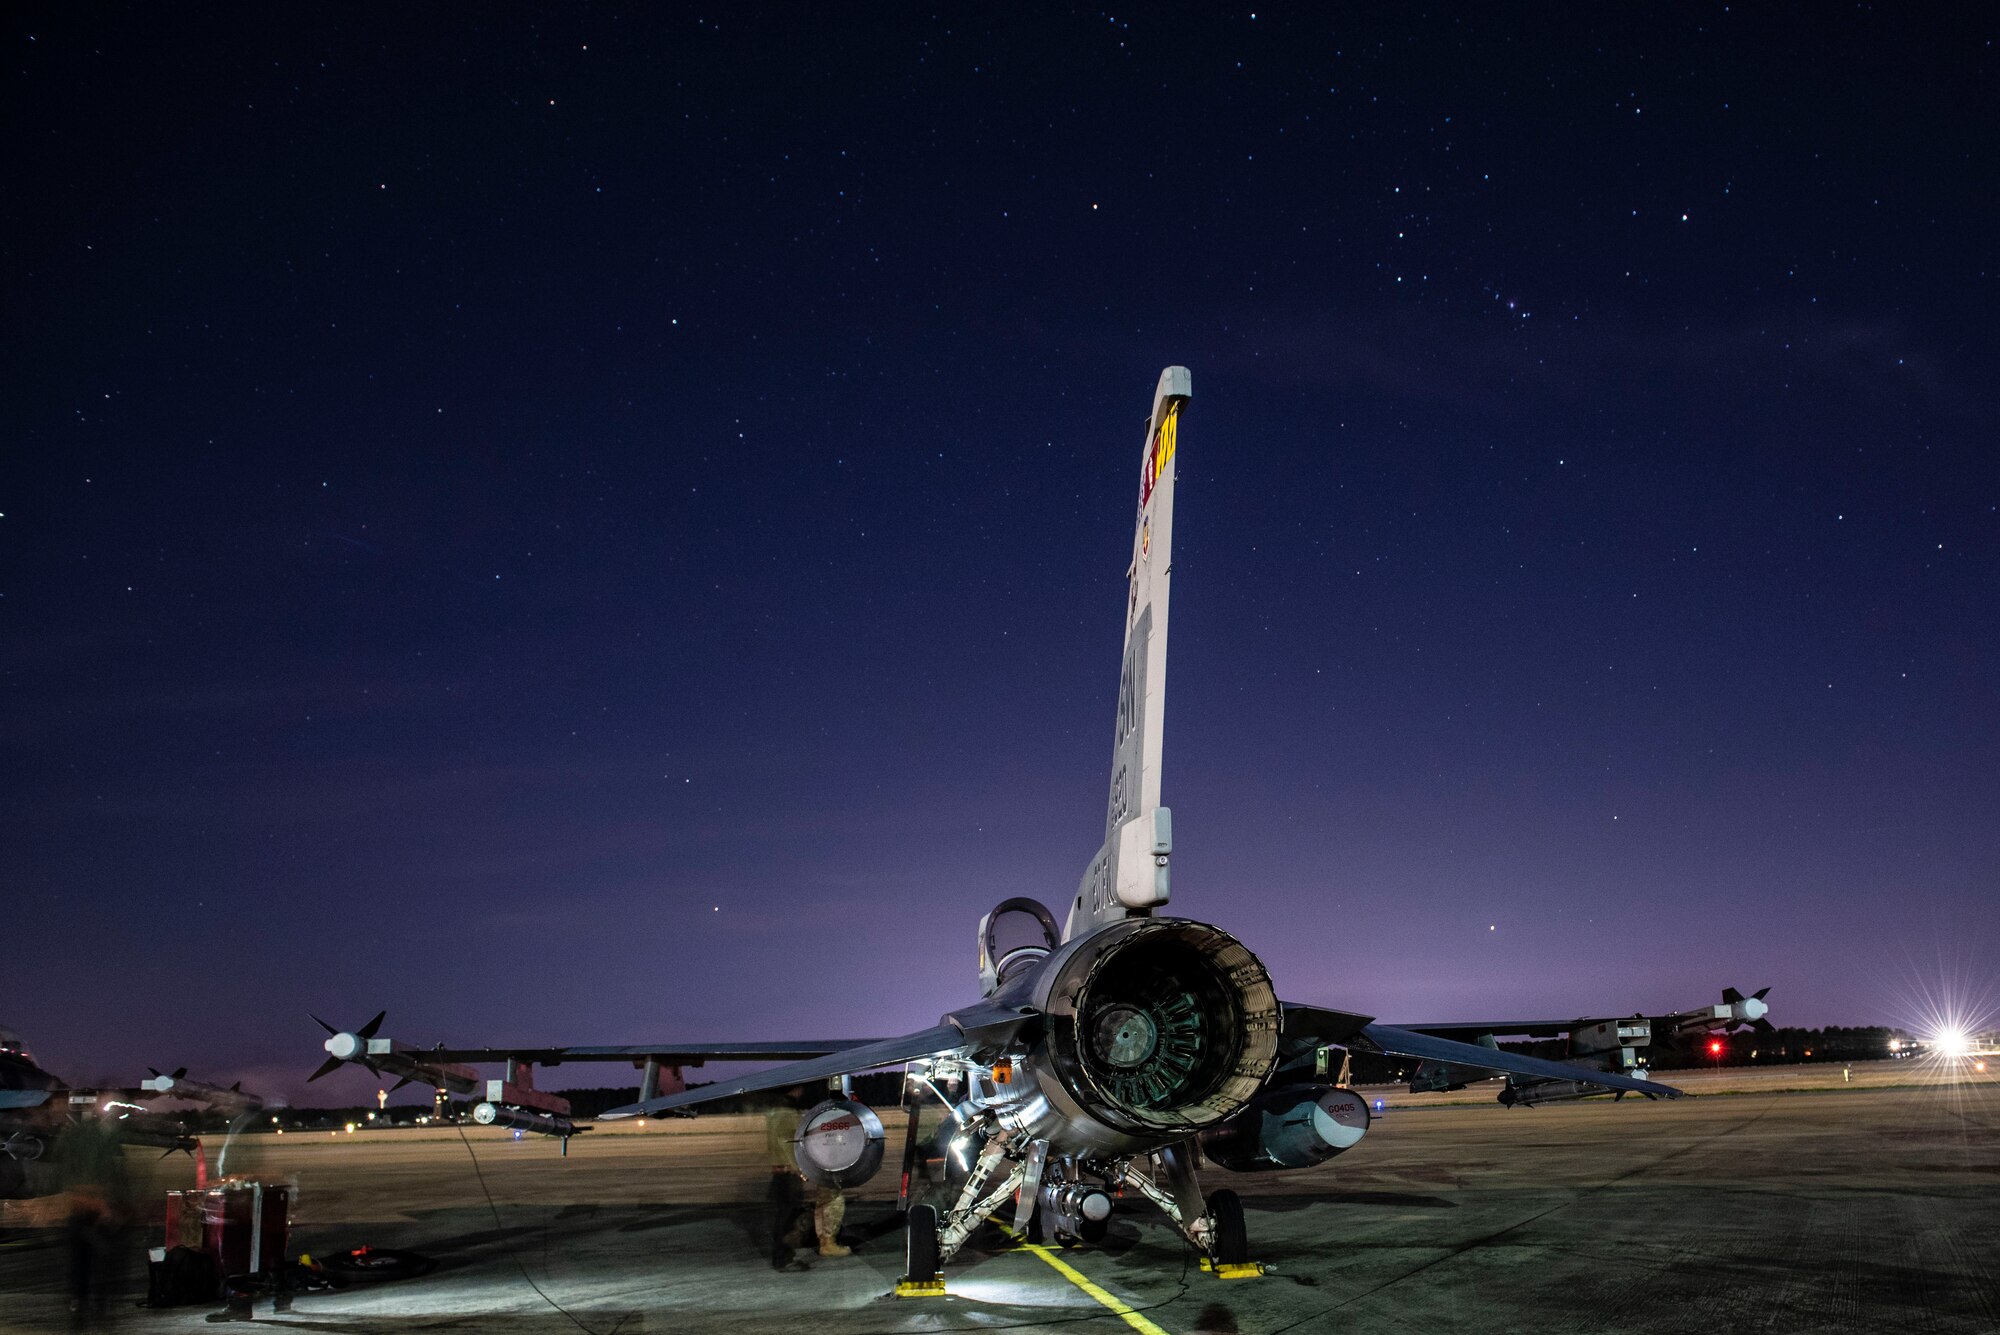 A photo of an F-16 at night with maintainers working on it.